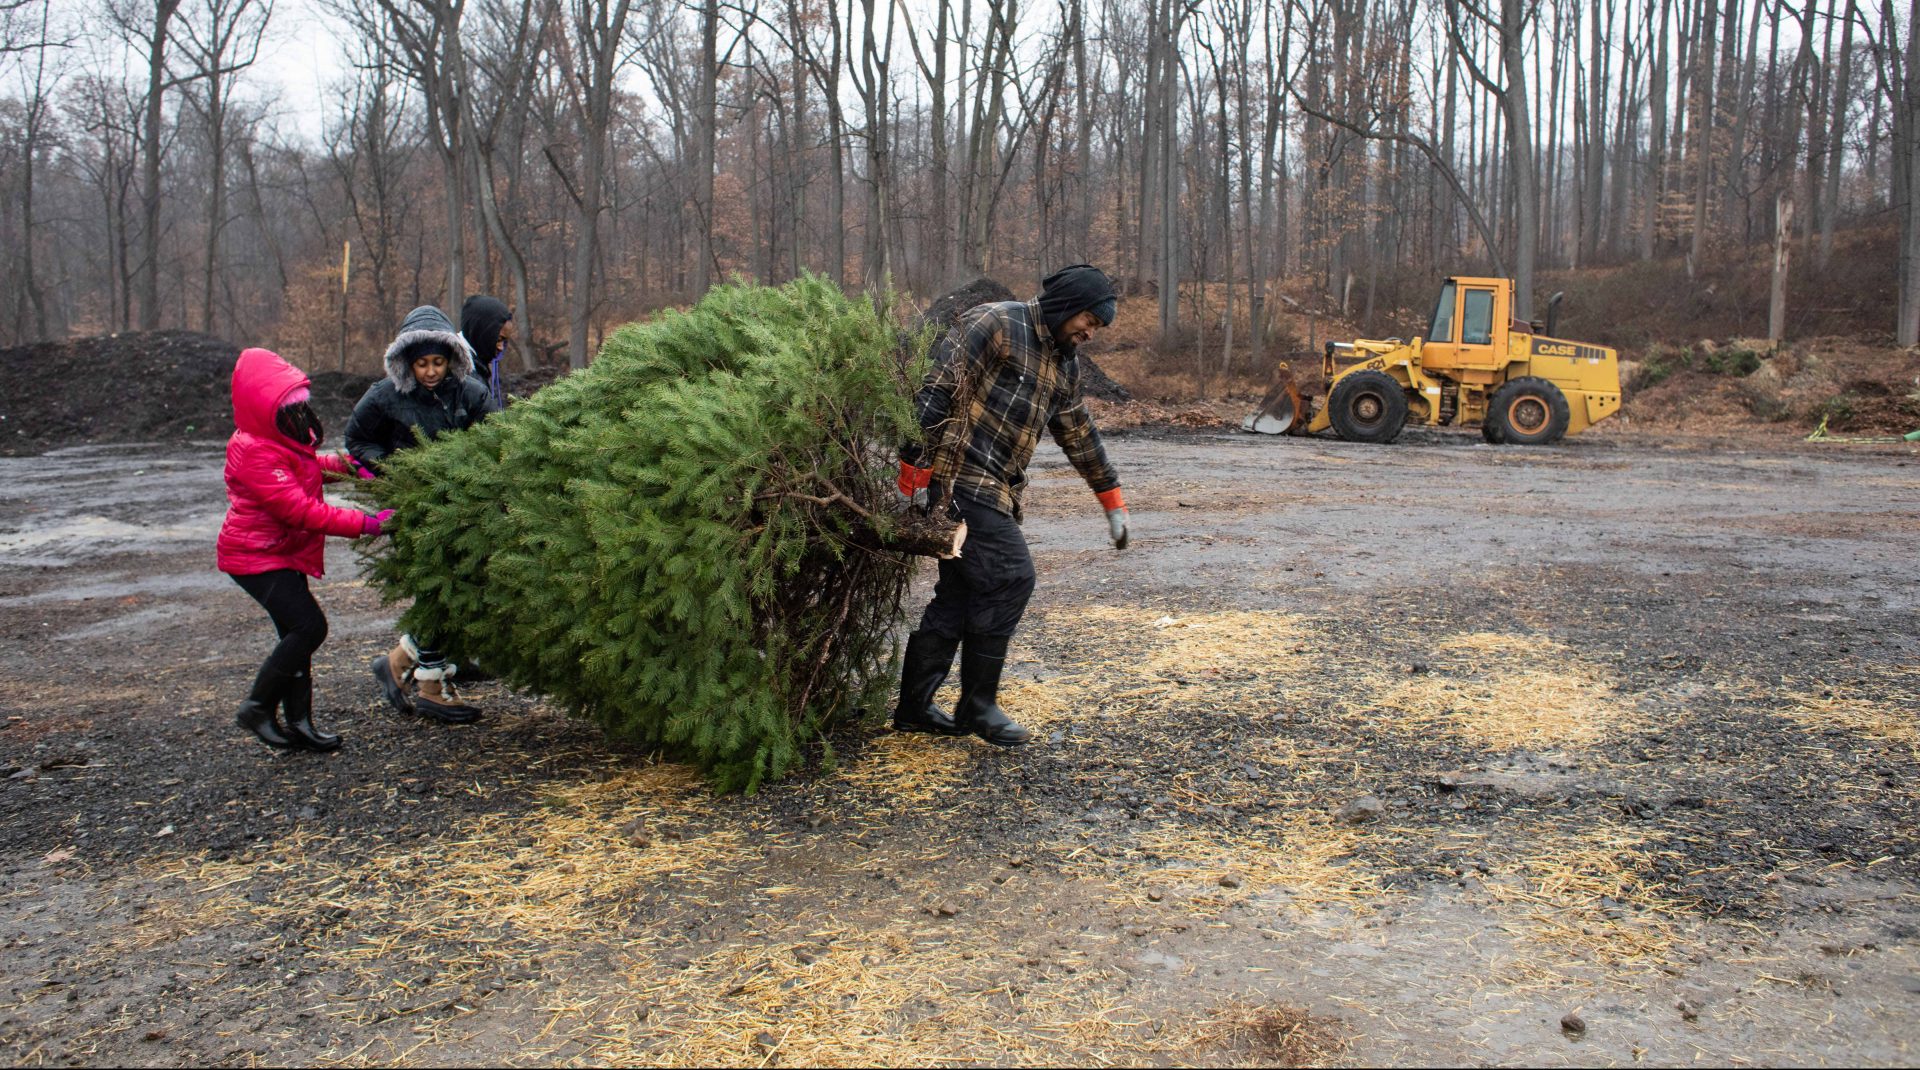 The Lynard family of Cherry Hill, New Jersey, carries their Christmas tree at Linvilla Orchards in Media, Pennsylvania on Sunday.